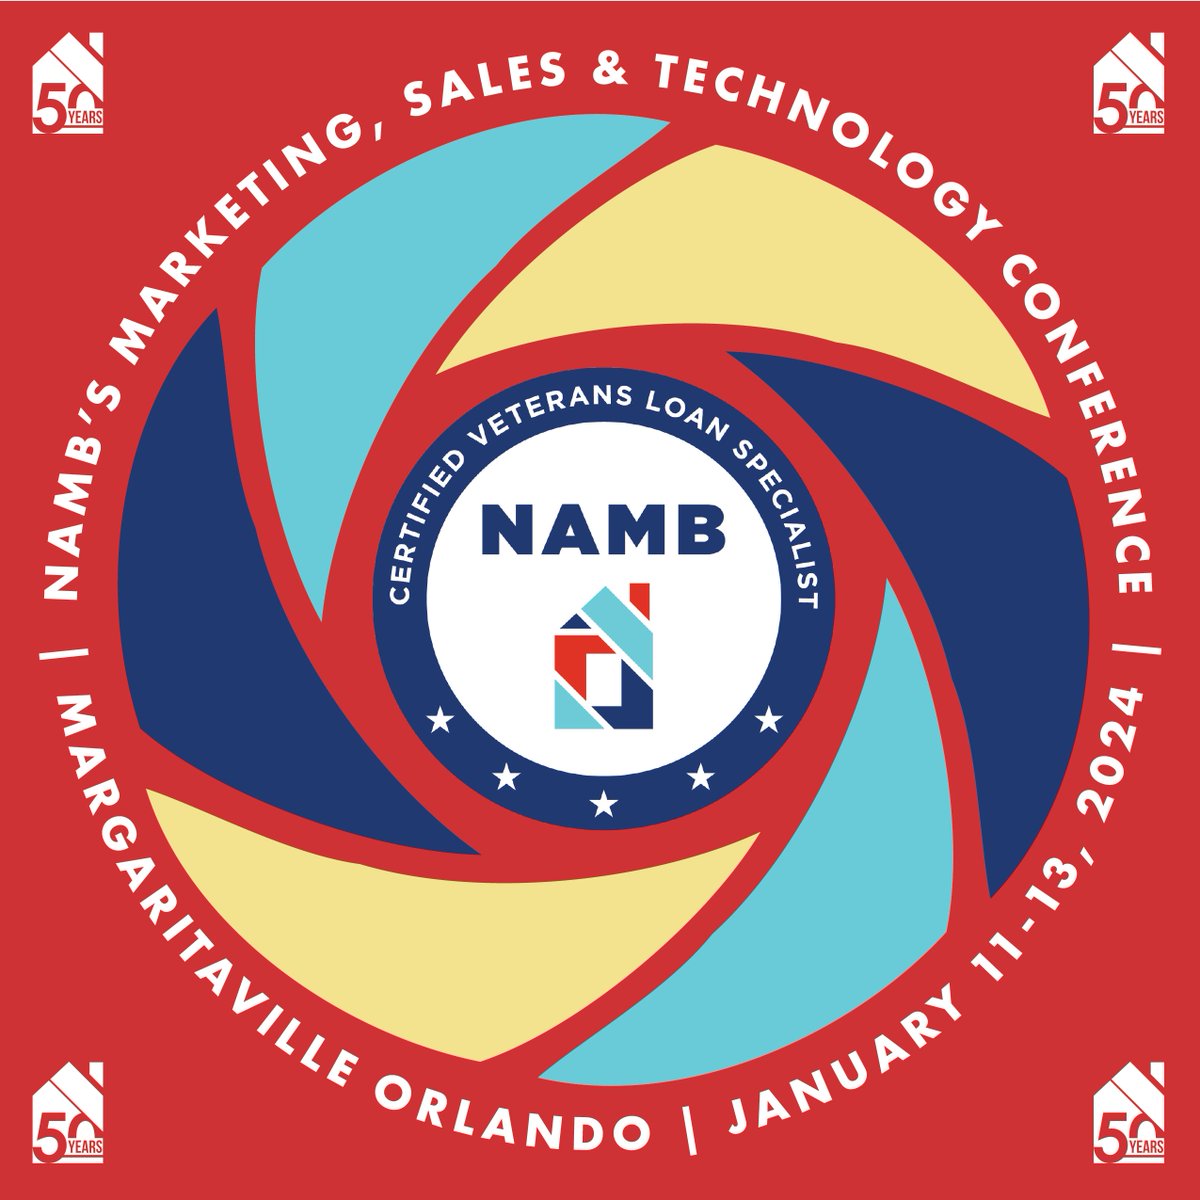 Start 2024 off right with #NAMBFocus! Our annual Marketing, Sales & Tech Conference draws the country’s top mortgage pros & industry experts. Get certified at our first CVLS class of the year! Attend FREE using discount code FOCUS2024 (until 12/20/23). namb.org/focus